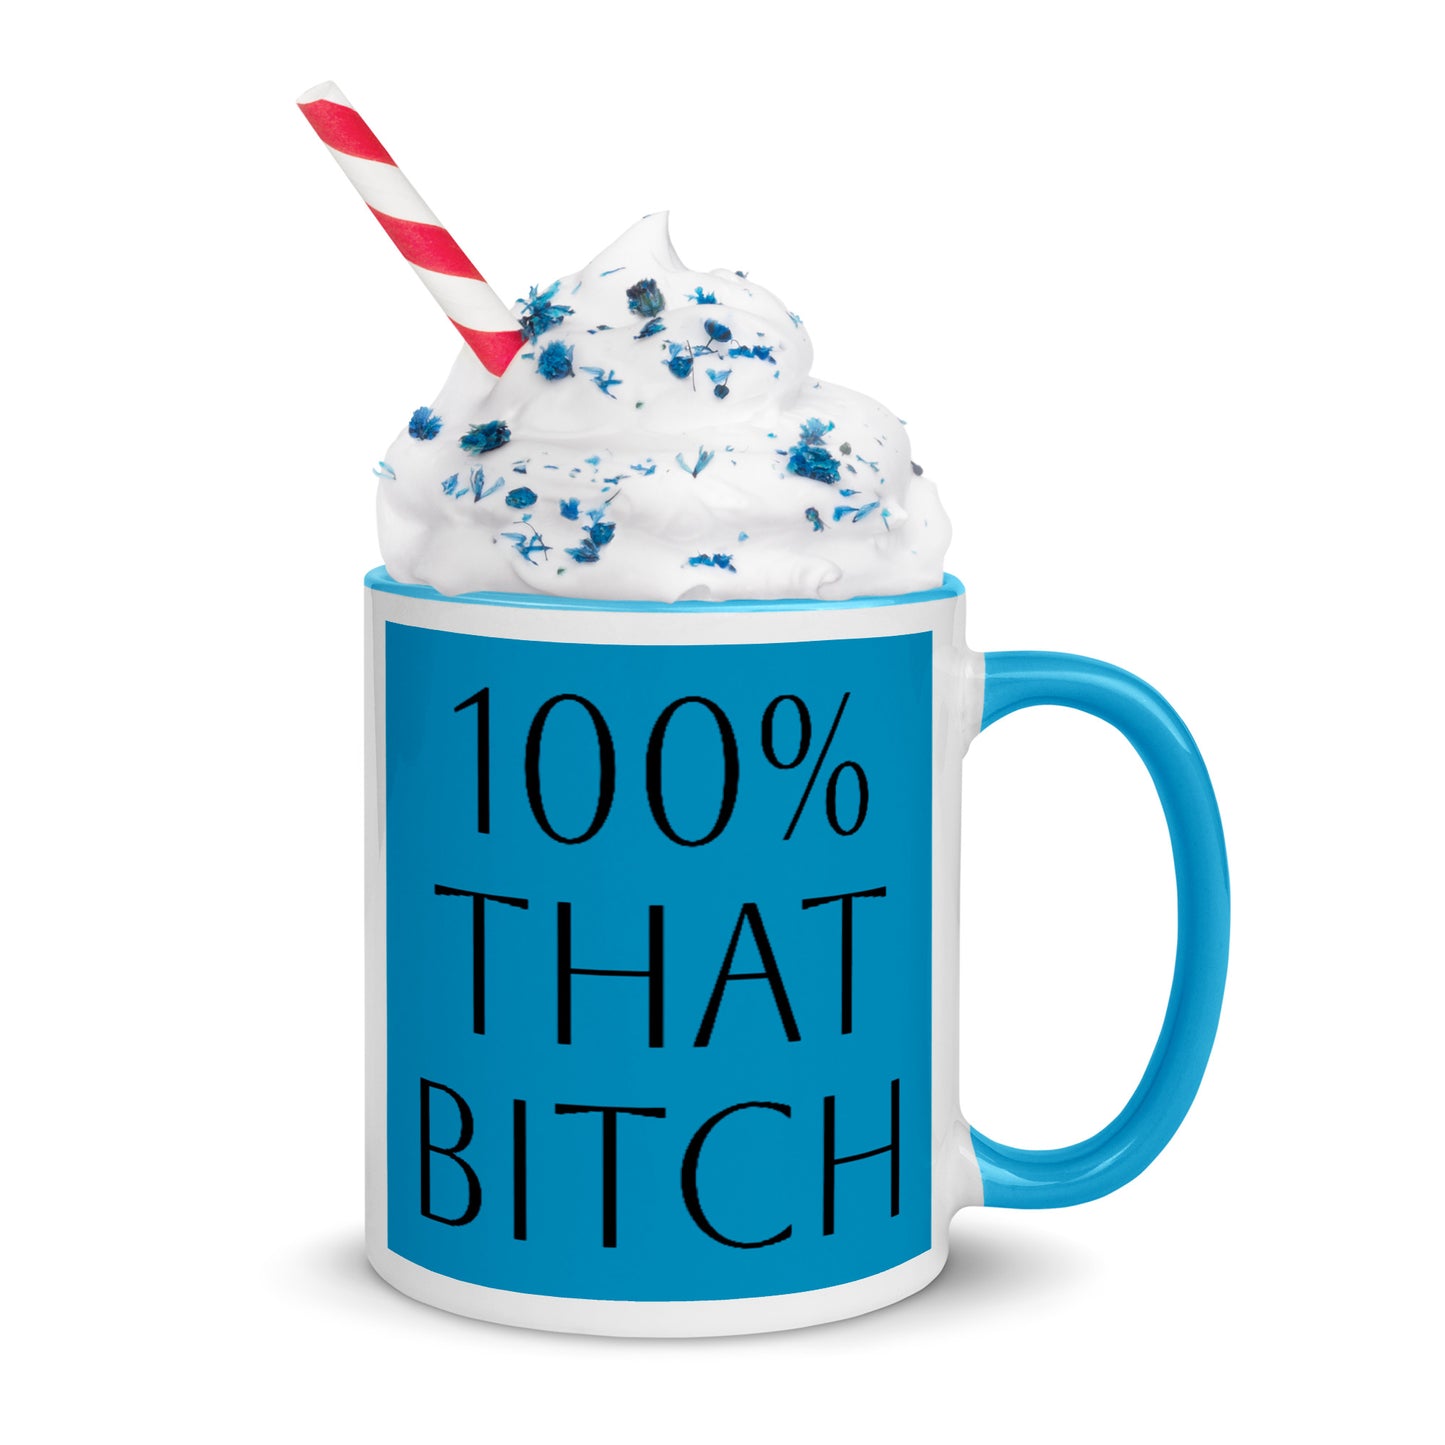 100% That Bitch - Mug with Color Inside